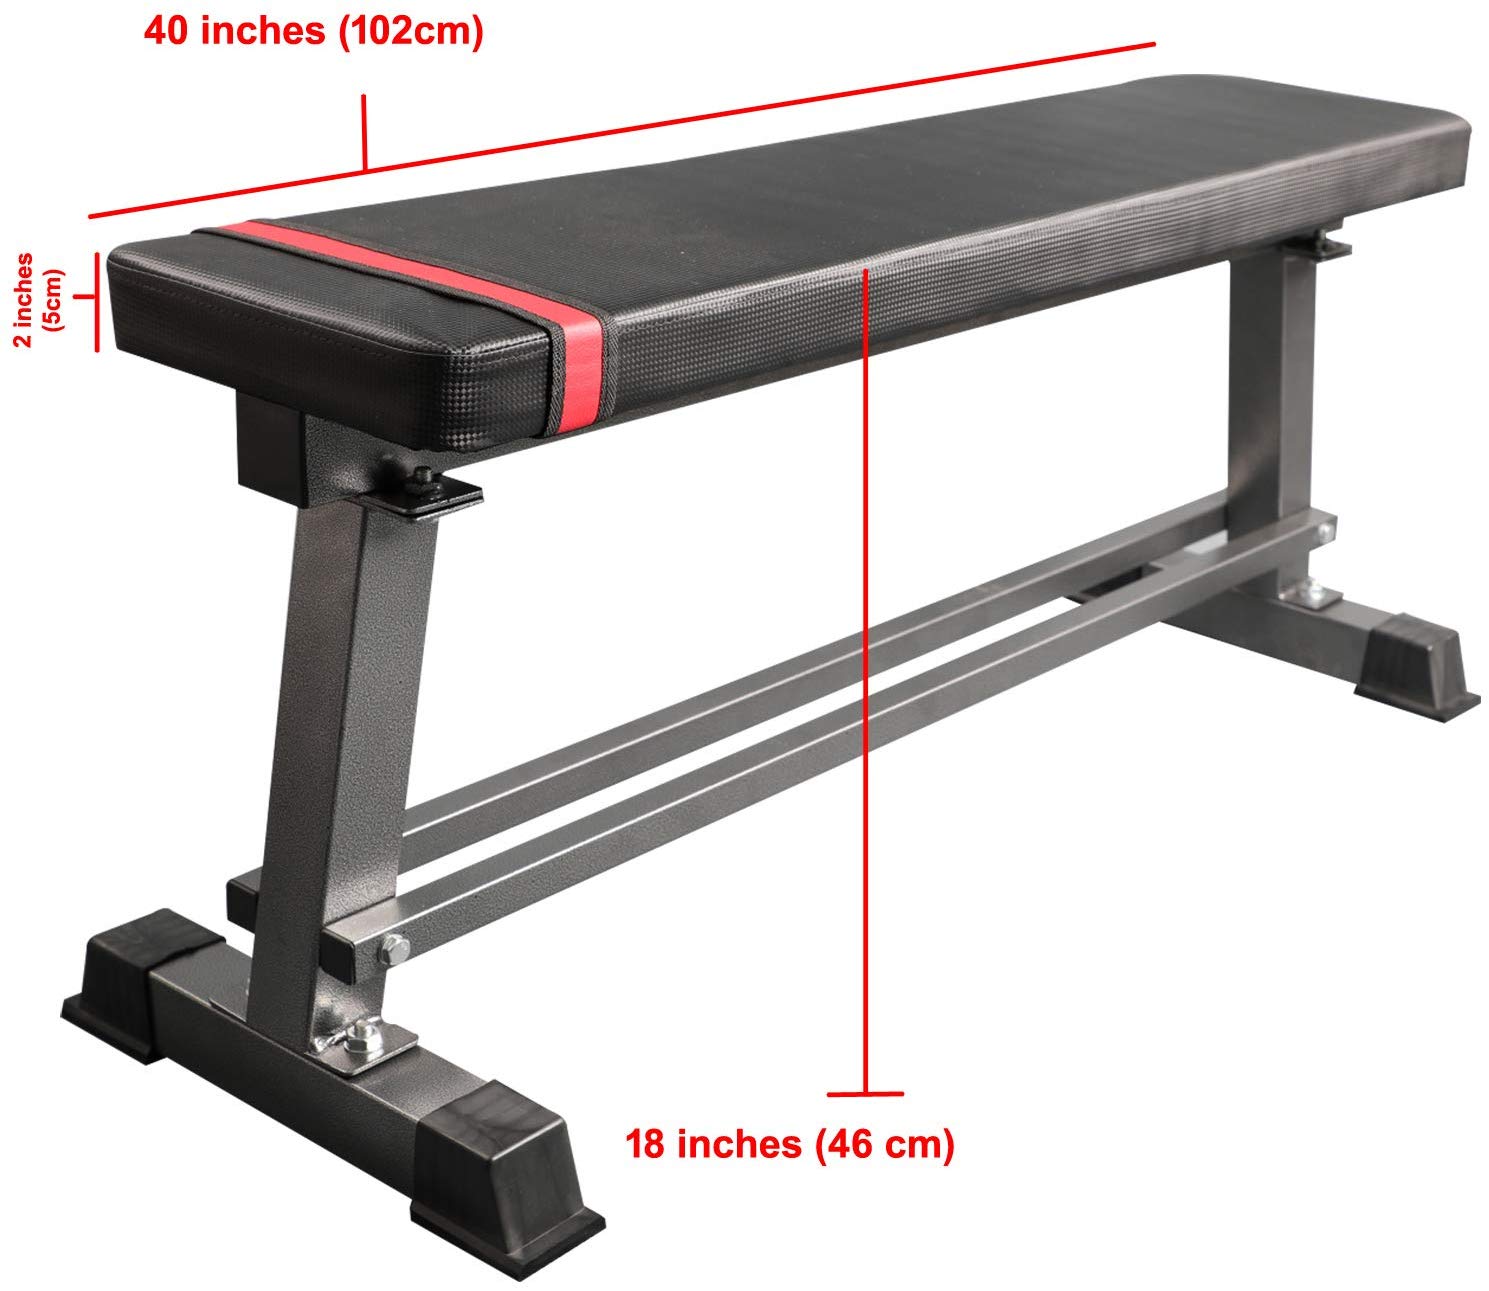 Fitness Maniac Standard Weight Training Benches Flat Utility Bench for and Ab Exercises